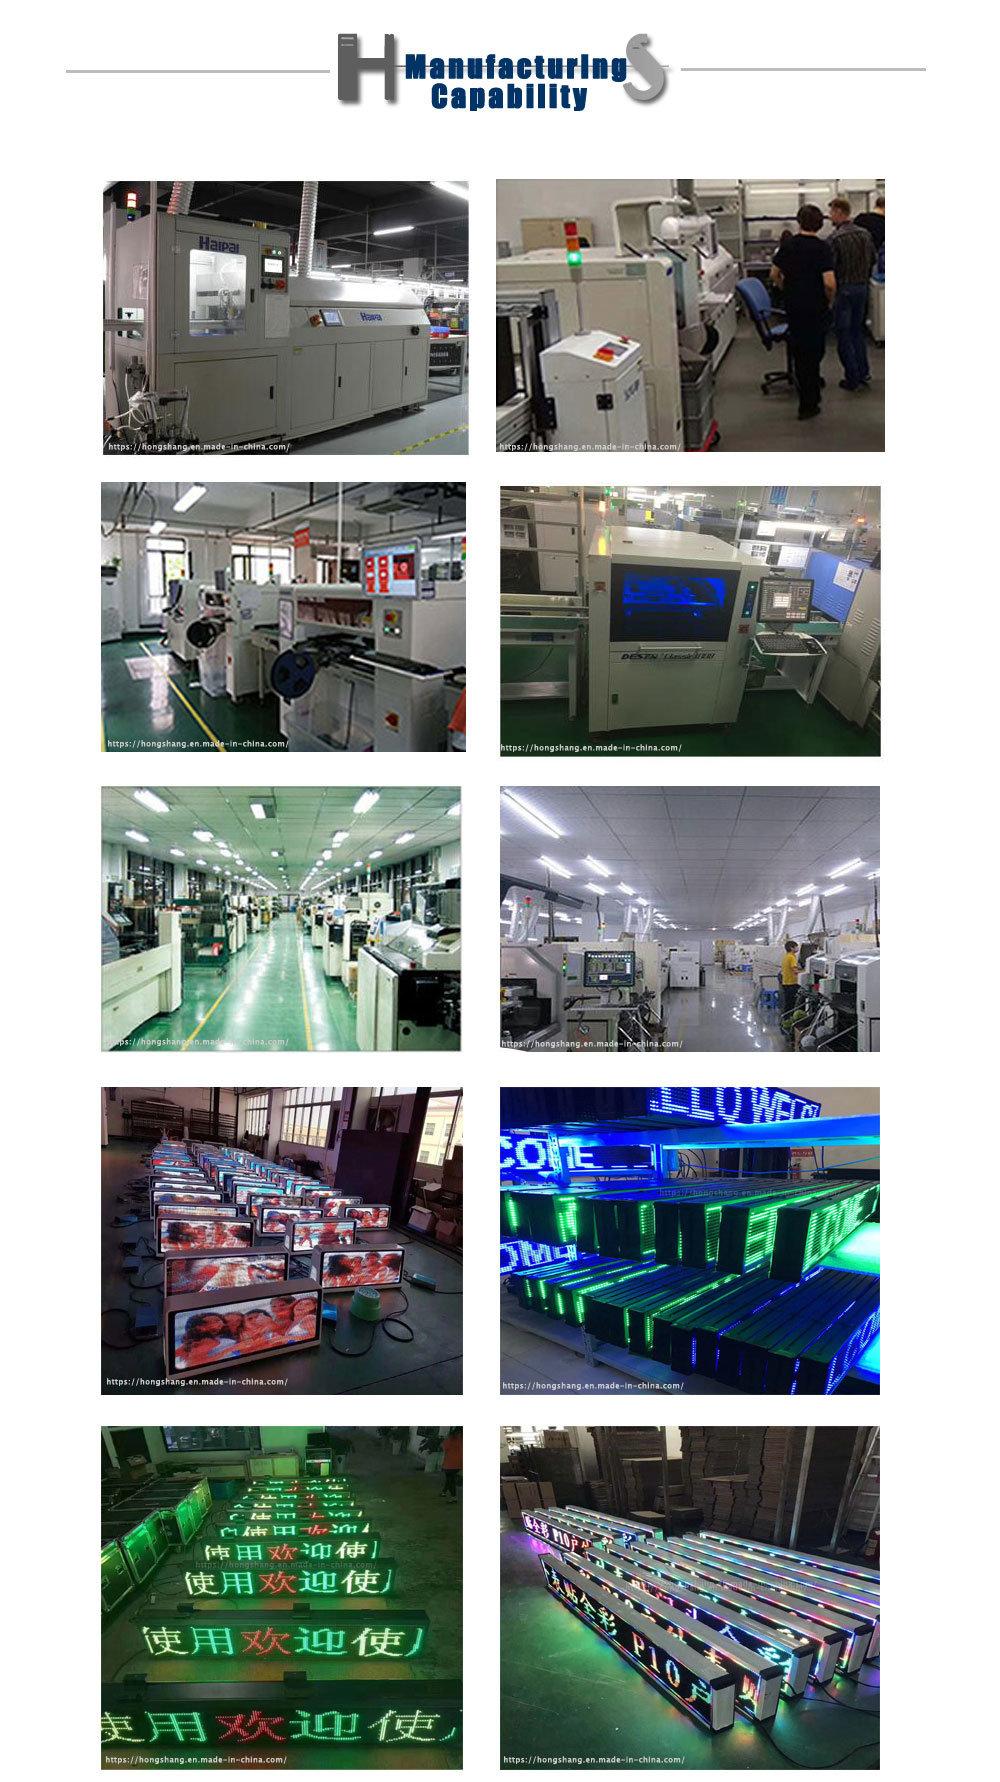 Store Promotion LED Display Panel Commercial Advertising Display Screen